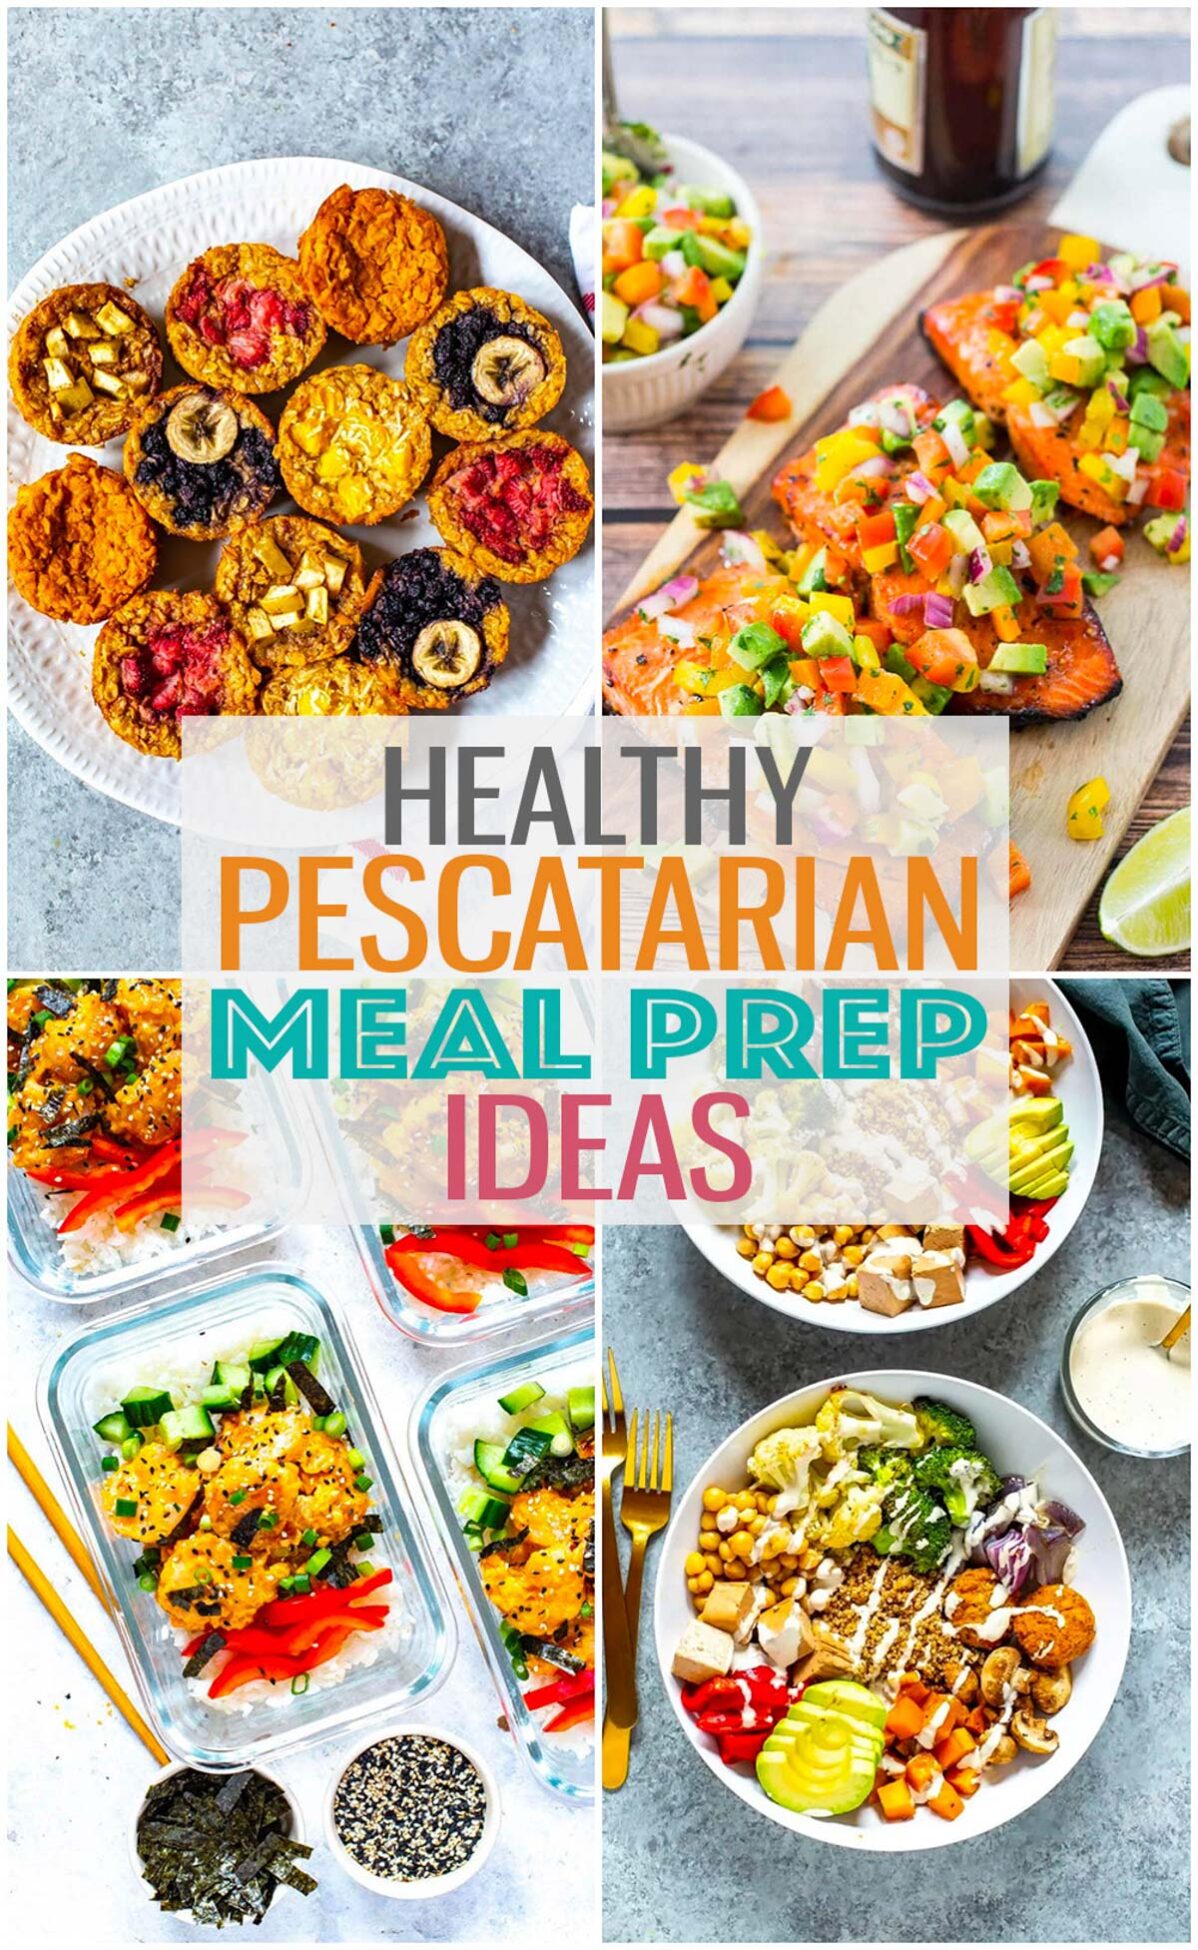 A collage of four different pescatarian meals with the text "Healthy Pescatarian Meal Prep Ideas" layered over top.